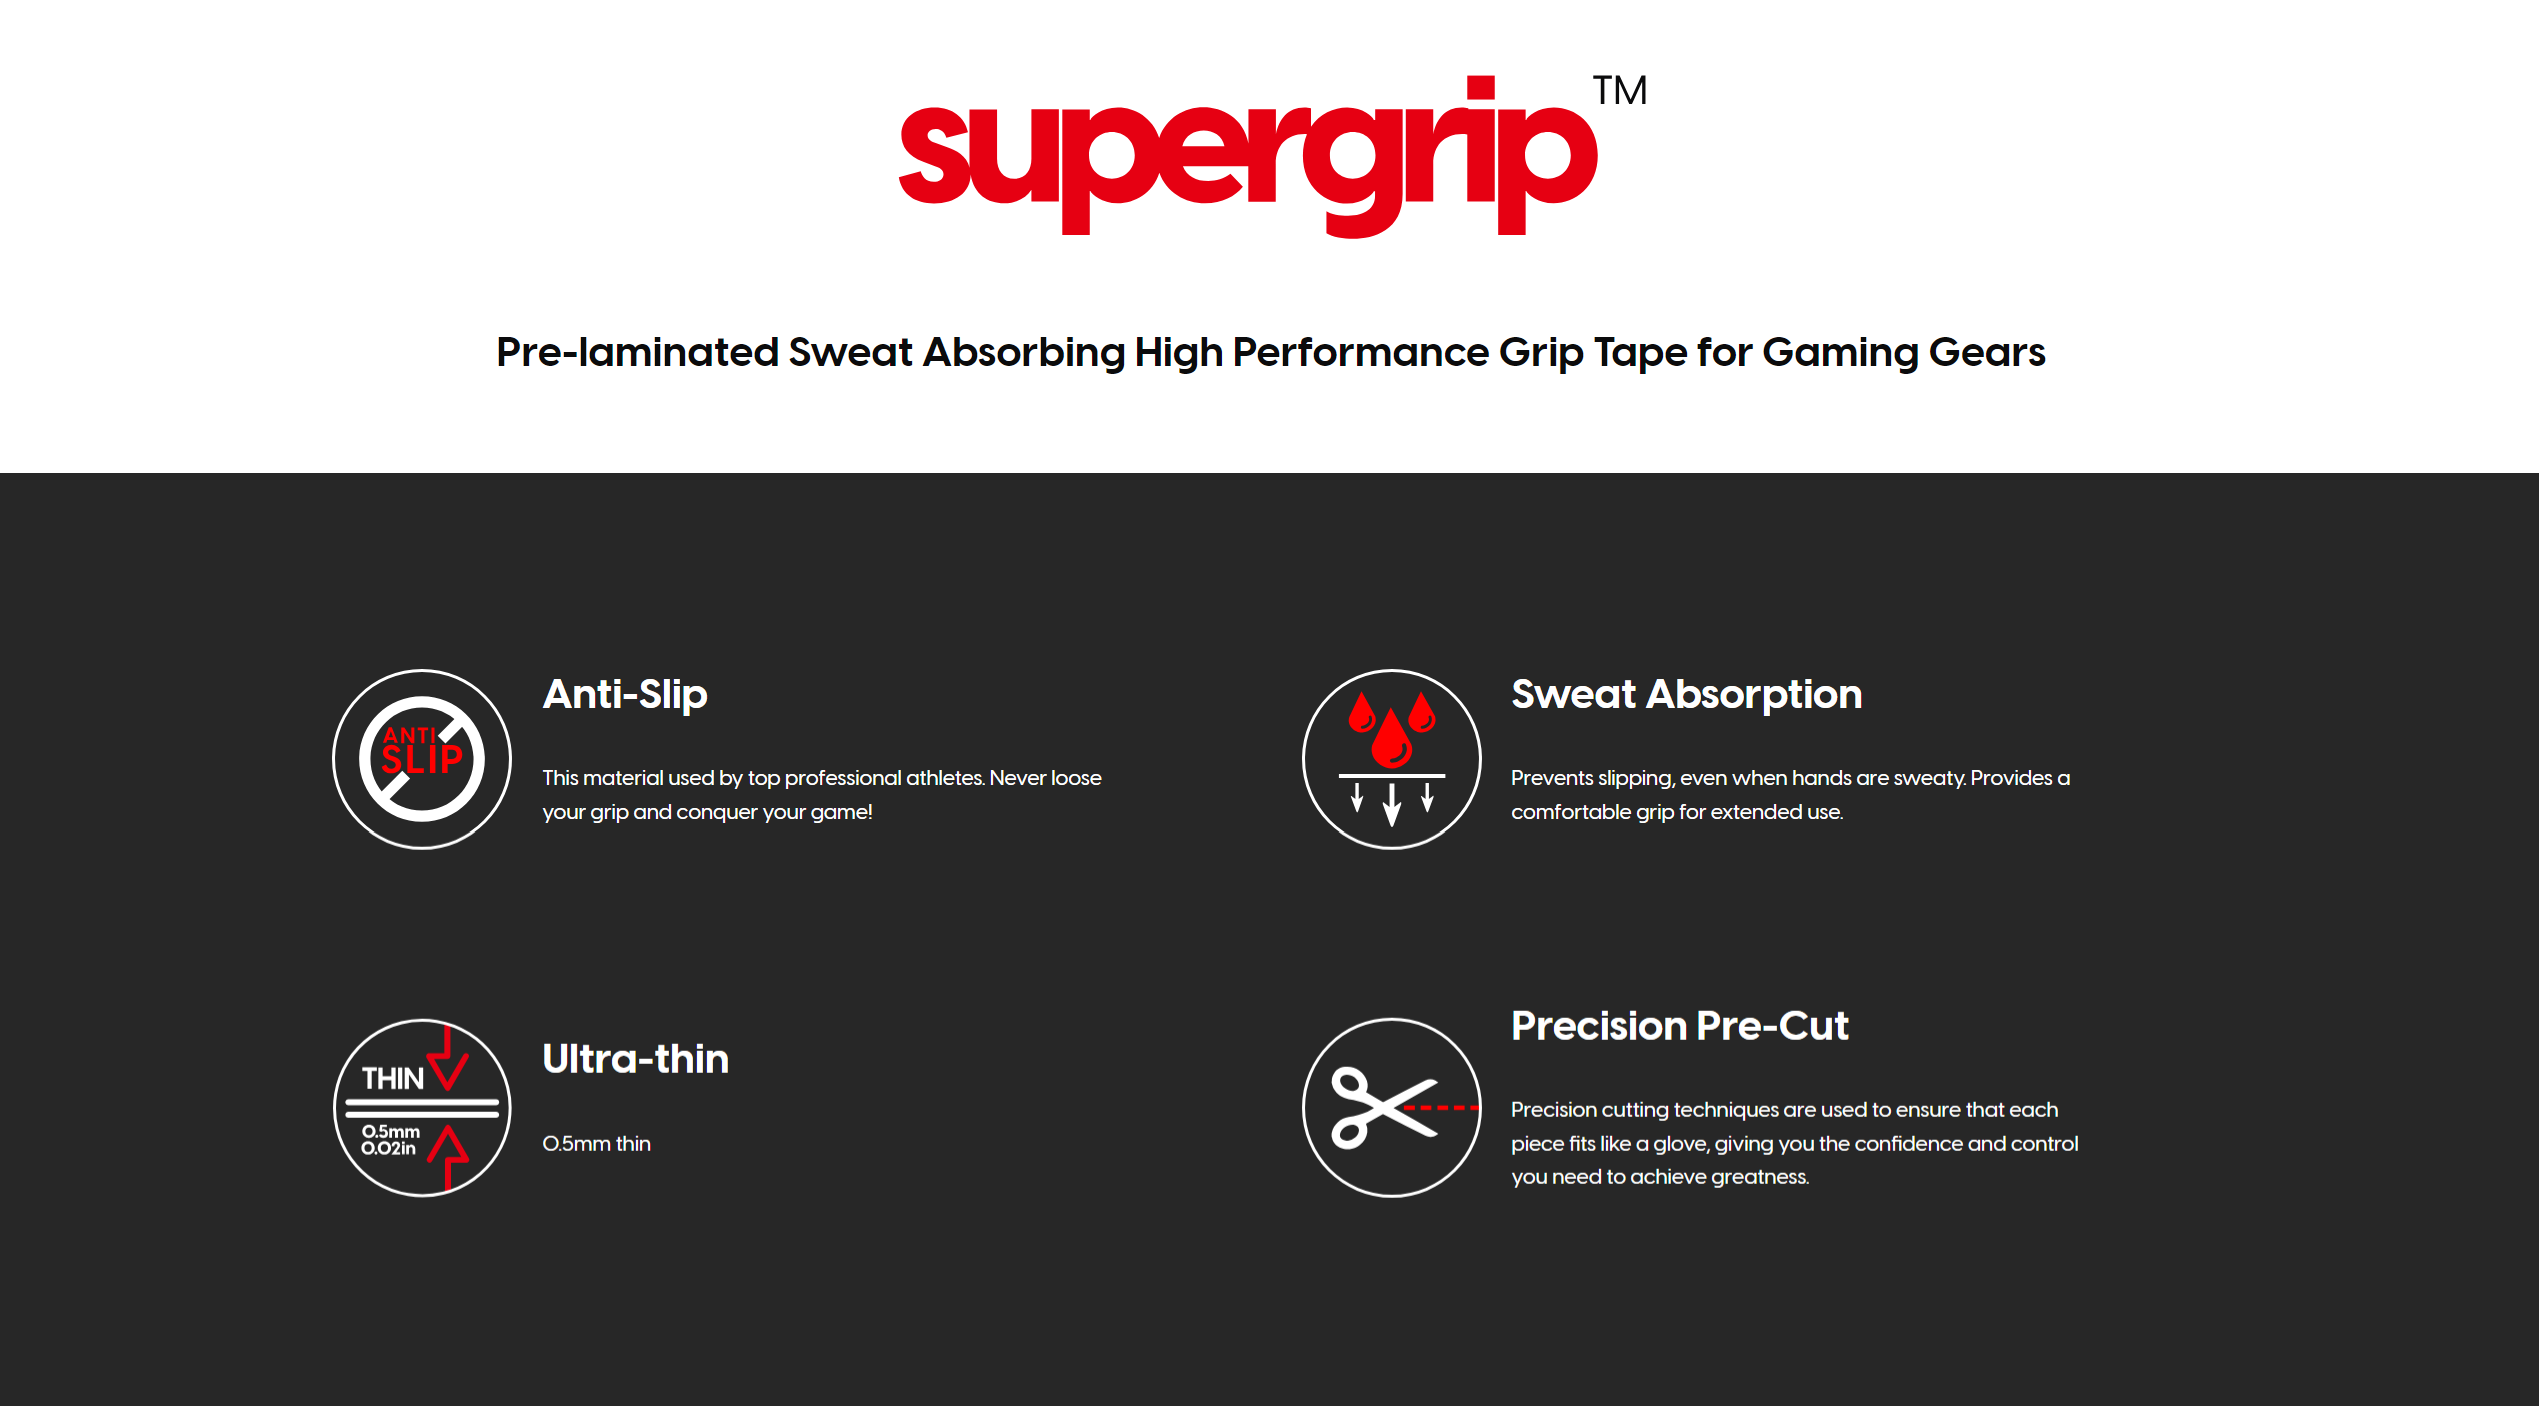 A large marketing image providing additional information about the product Pulsar Supergrip Grip Tape for Logitech G Pro X Superlight - Additional alt info not provided